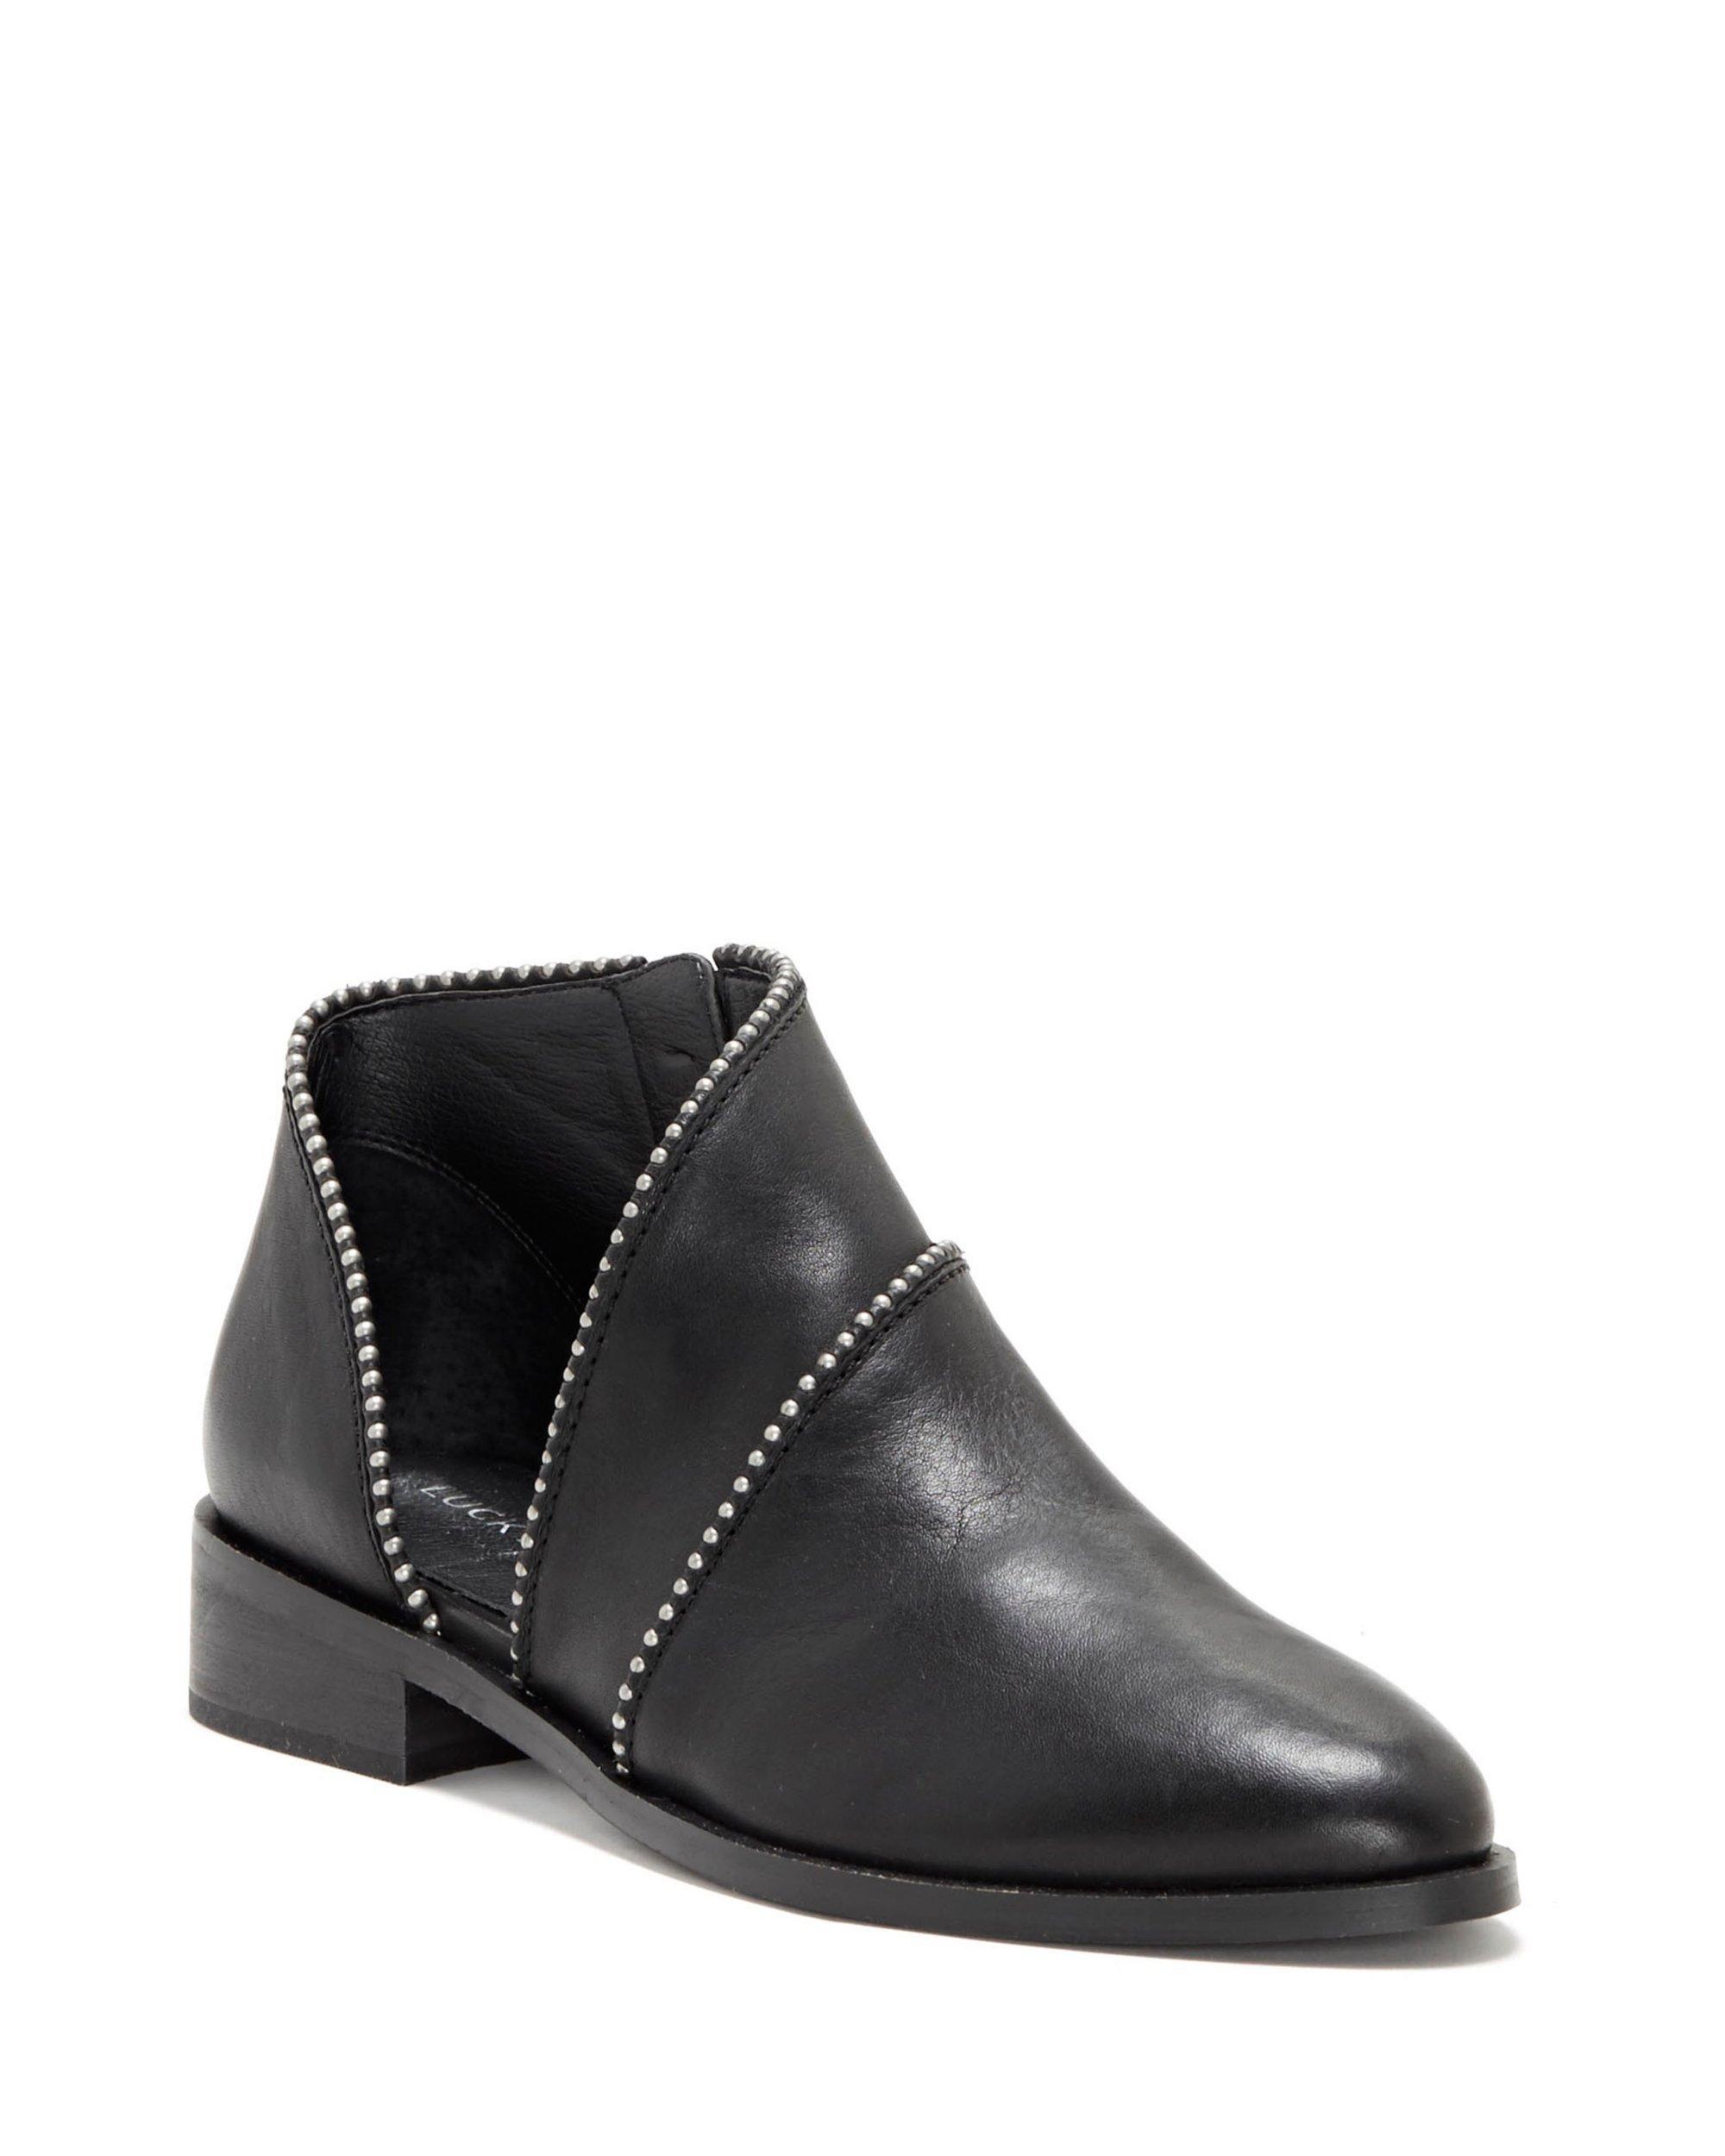 lucky brand prucella bootie